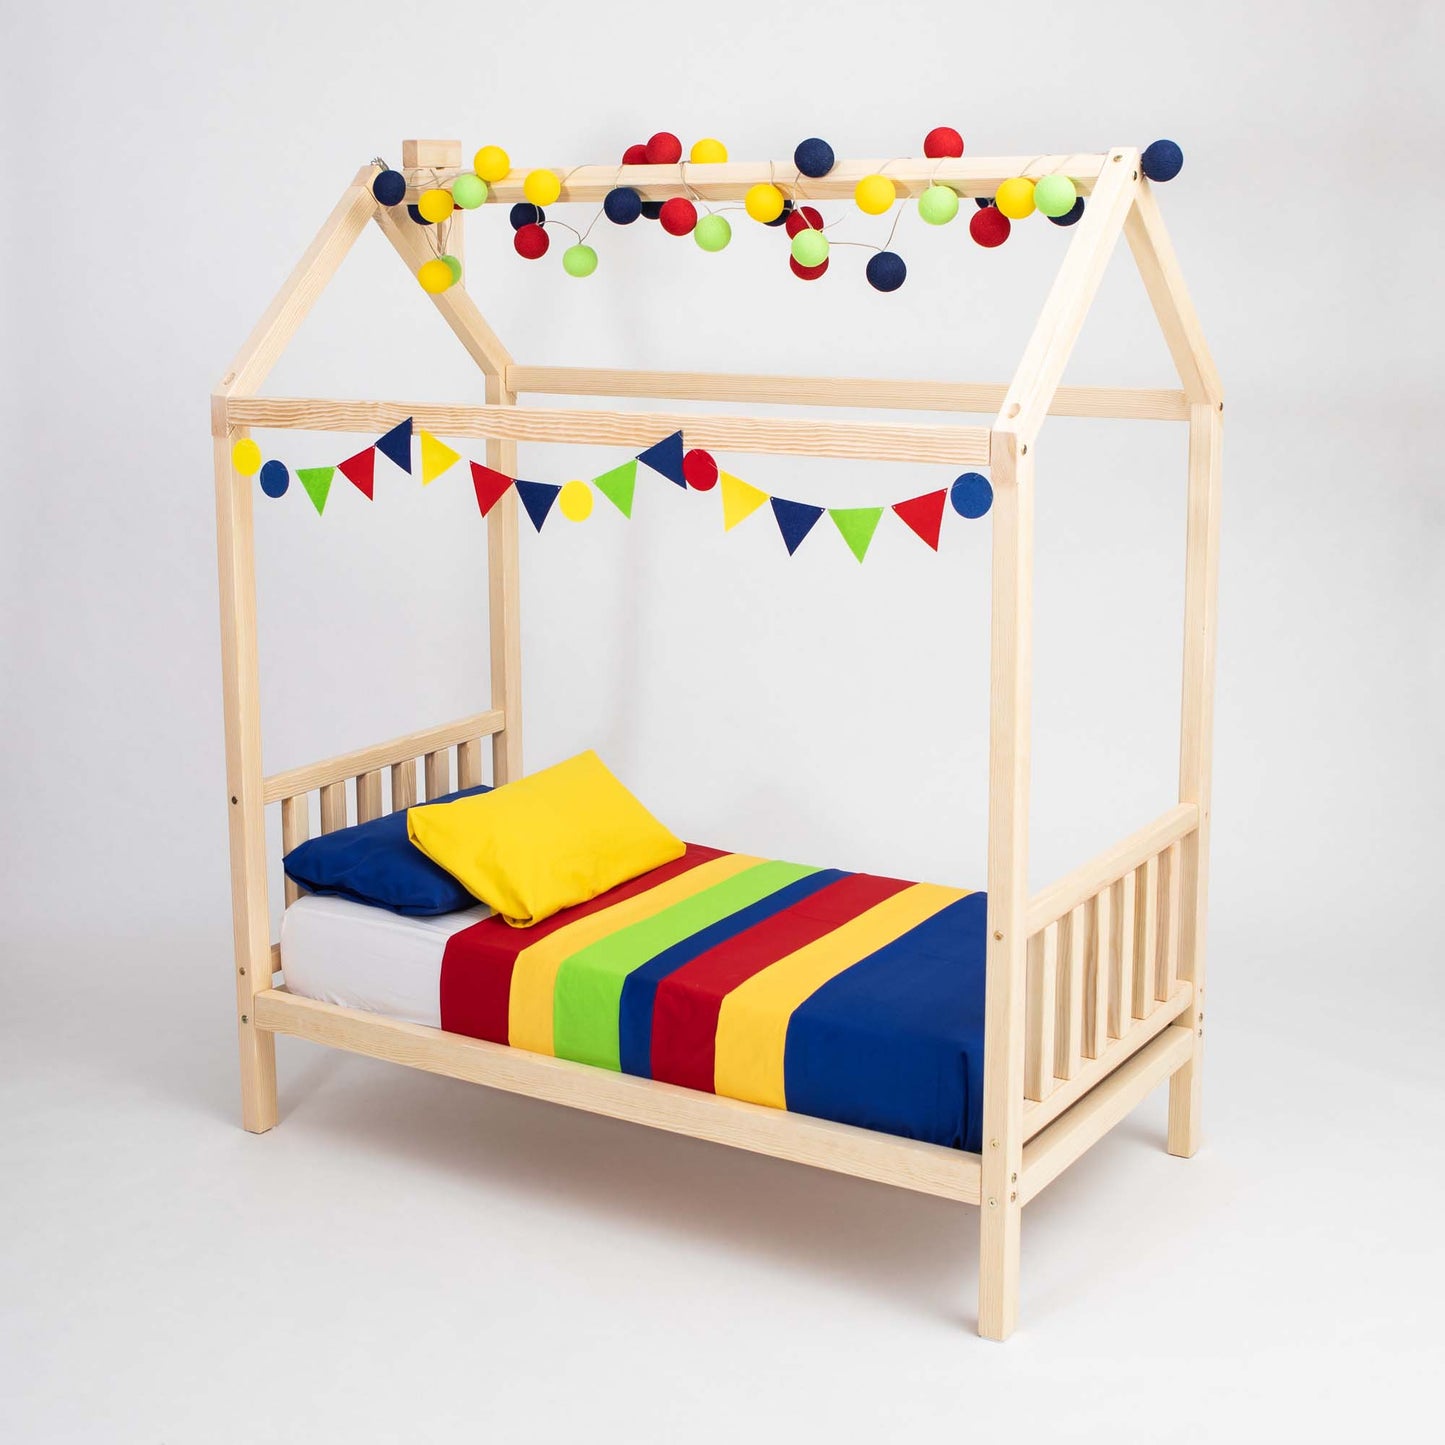 Toddler house bed on legs with a headboard and footboard